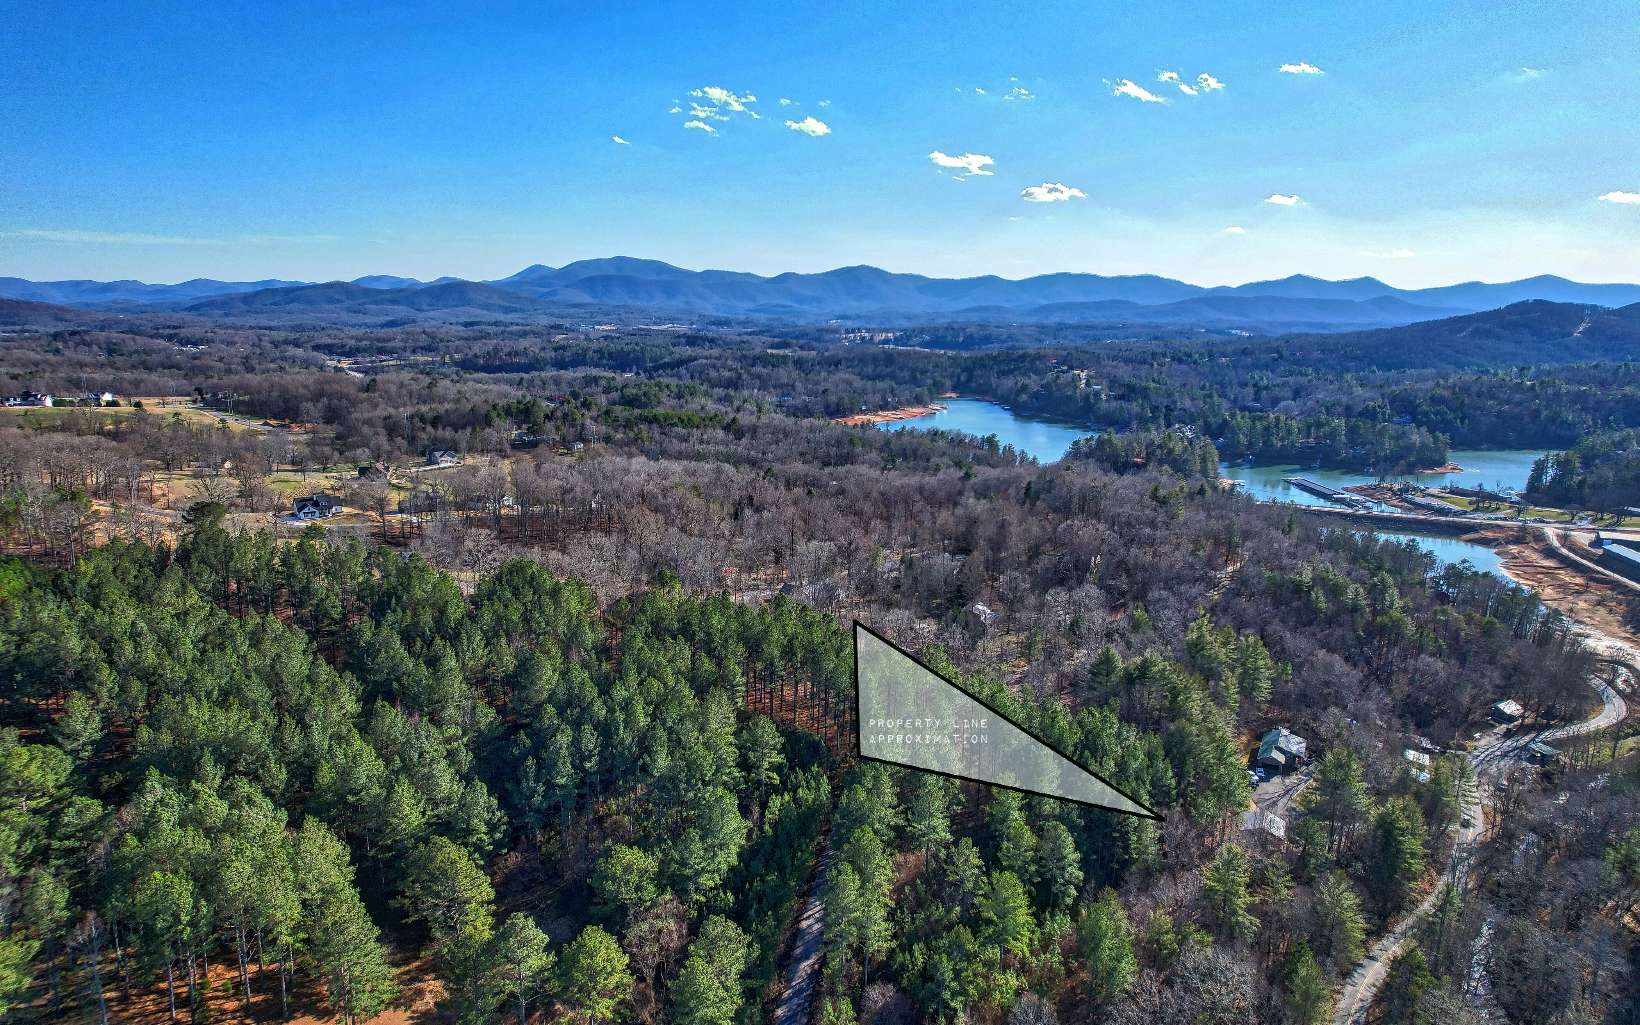 Come check out this lot that is within 5 minutes of town. Build your retirement home or that special getaway here in the North Georgia Mountains. Also a short drive to Nottely Marina for all your boating needs.